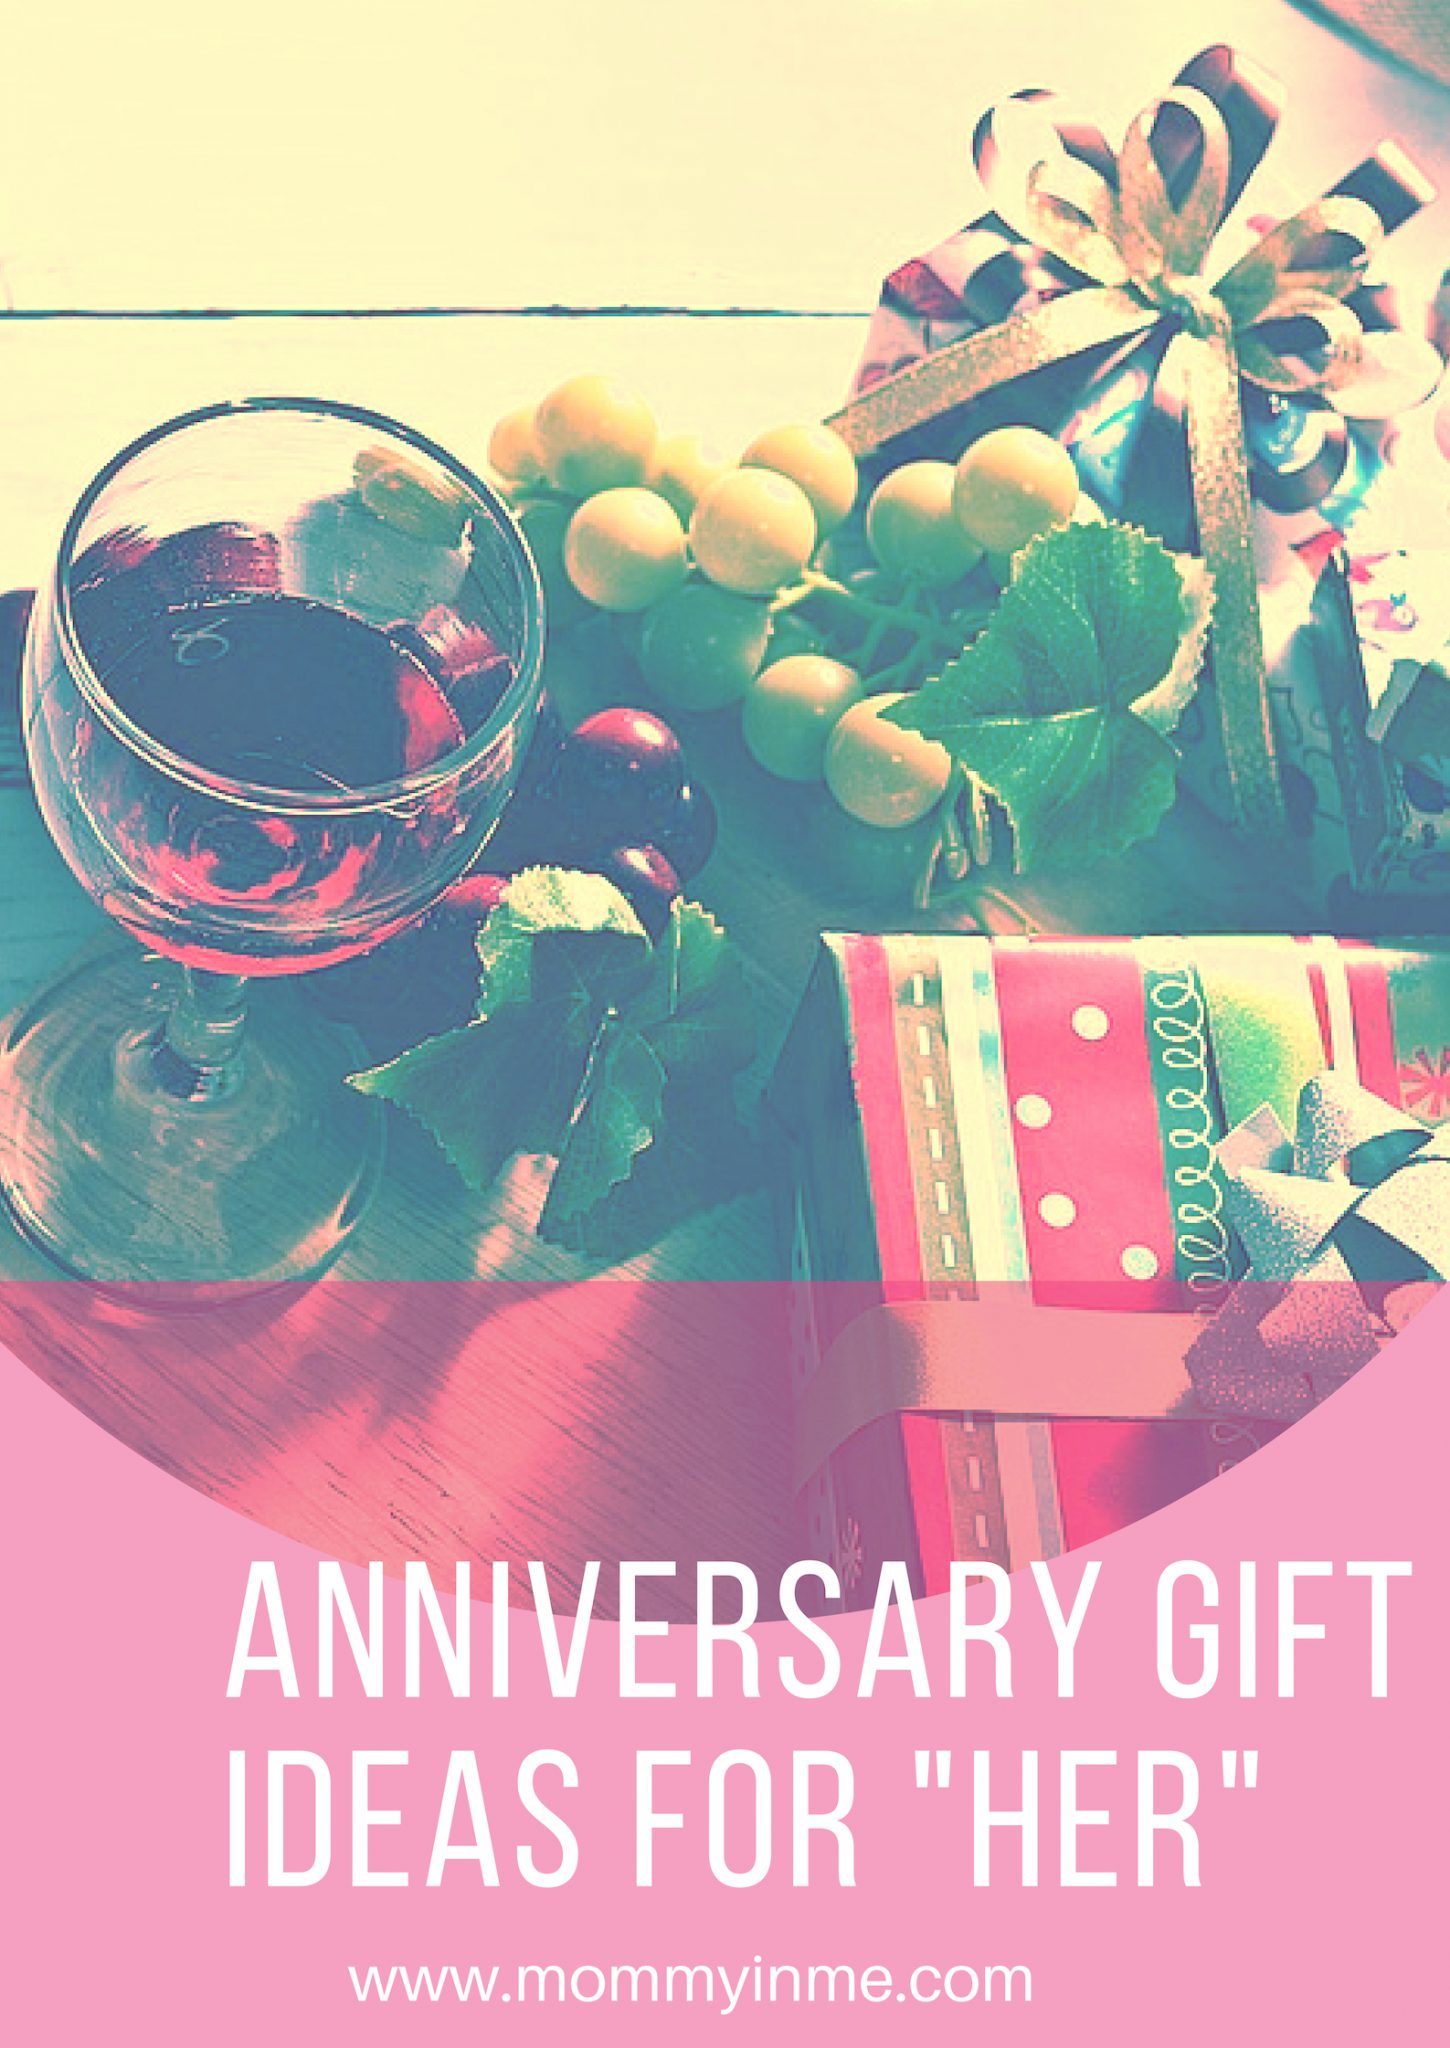 Here are some Anniversary gifting ideas for Her, for your better half that will make her feel the true love. #gifting #giftingideas #giftsforher #weddinganniversary #anniversaryspecial